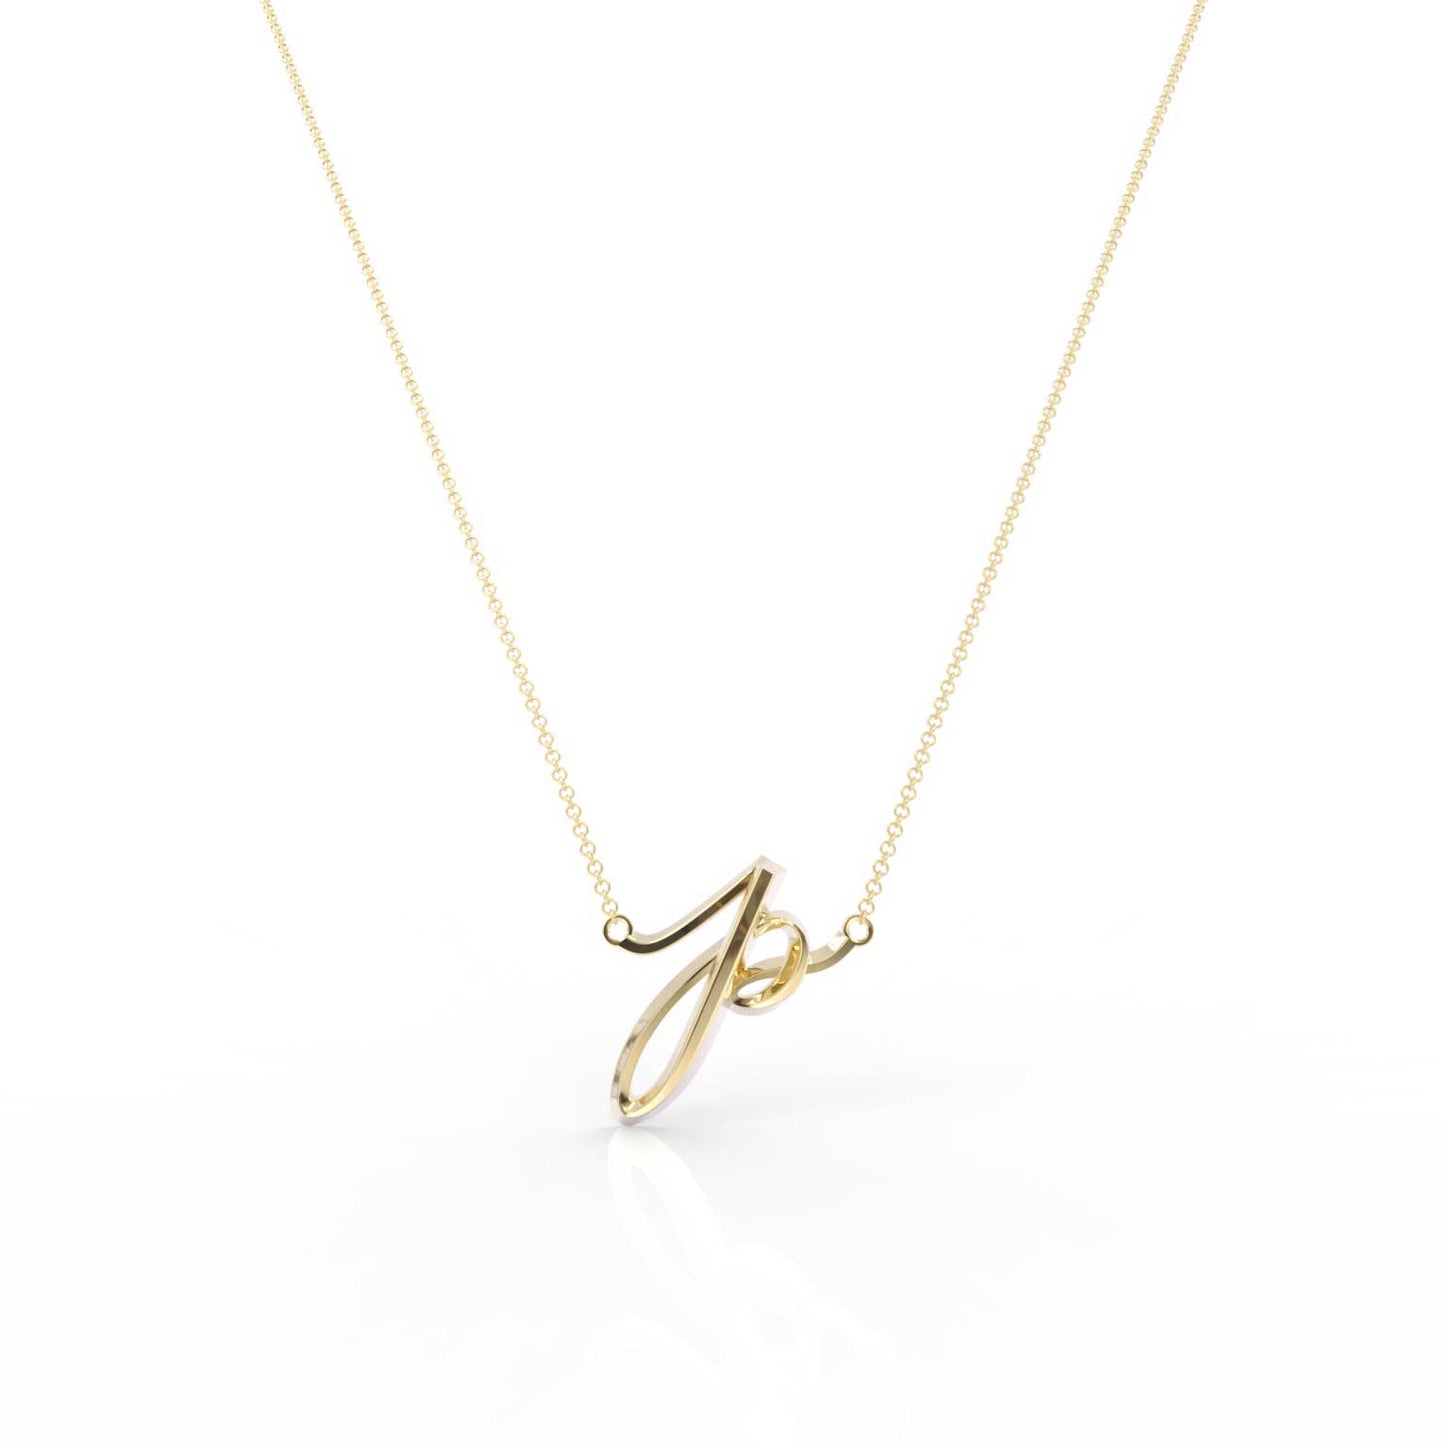 The Love Collect - "P" Necklace